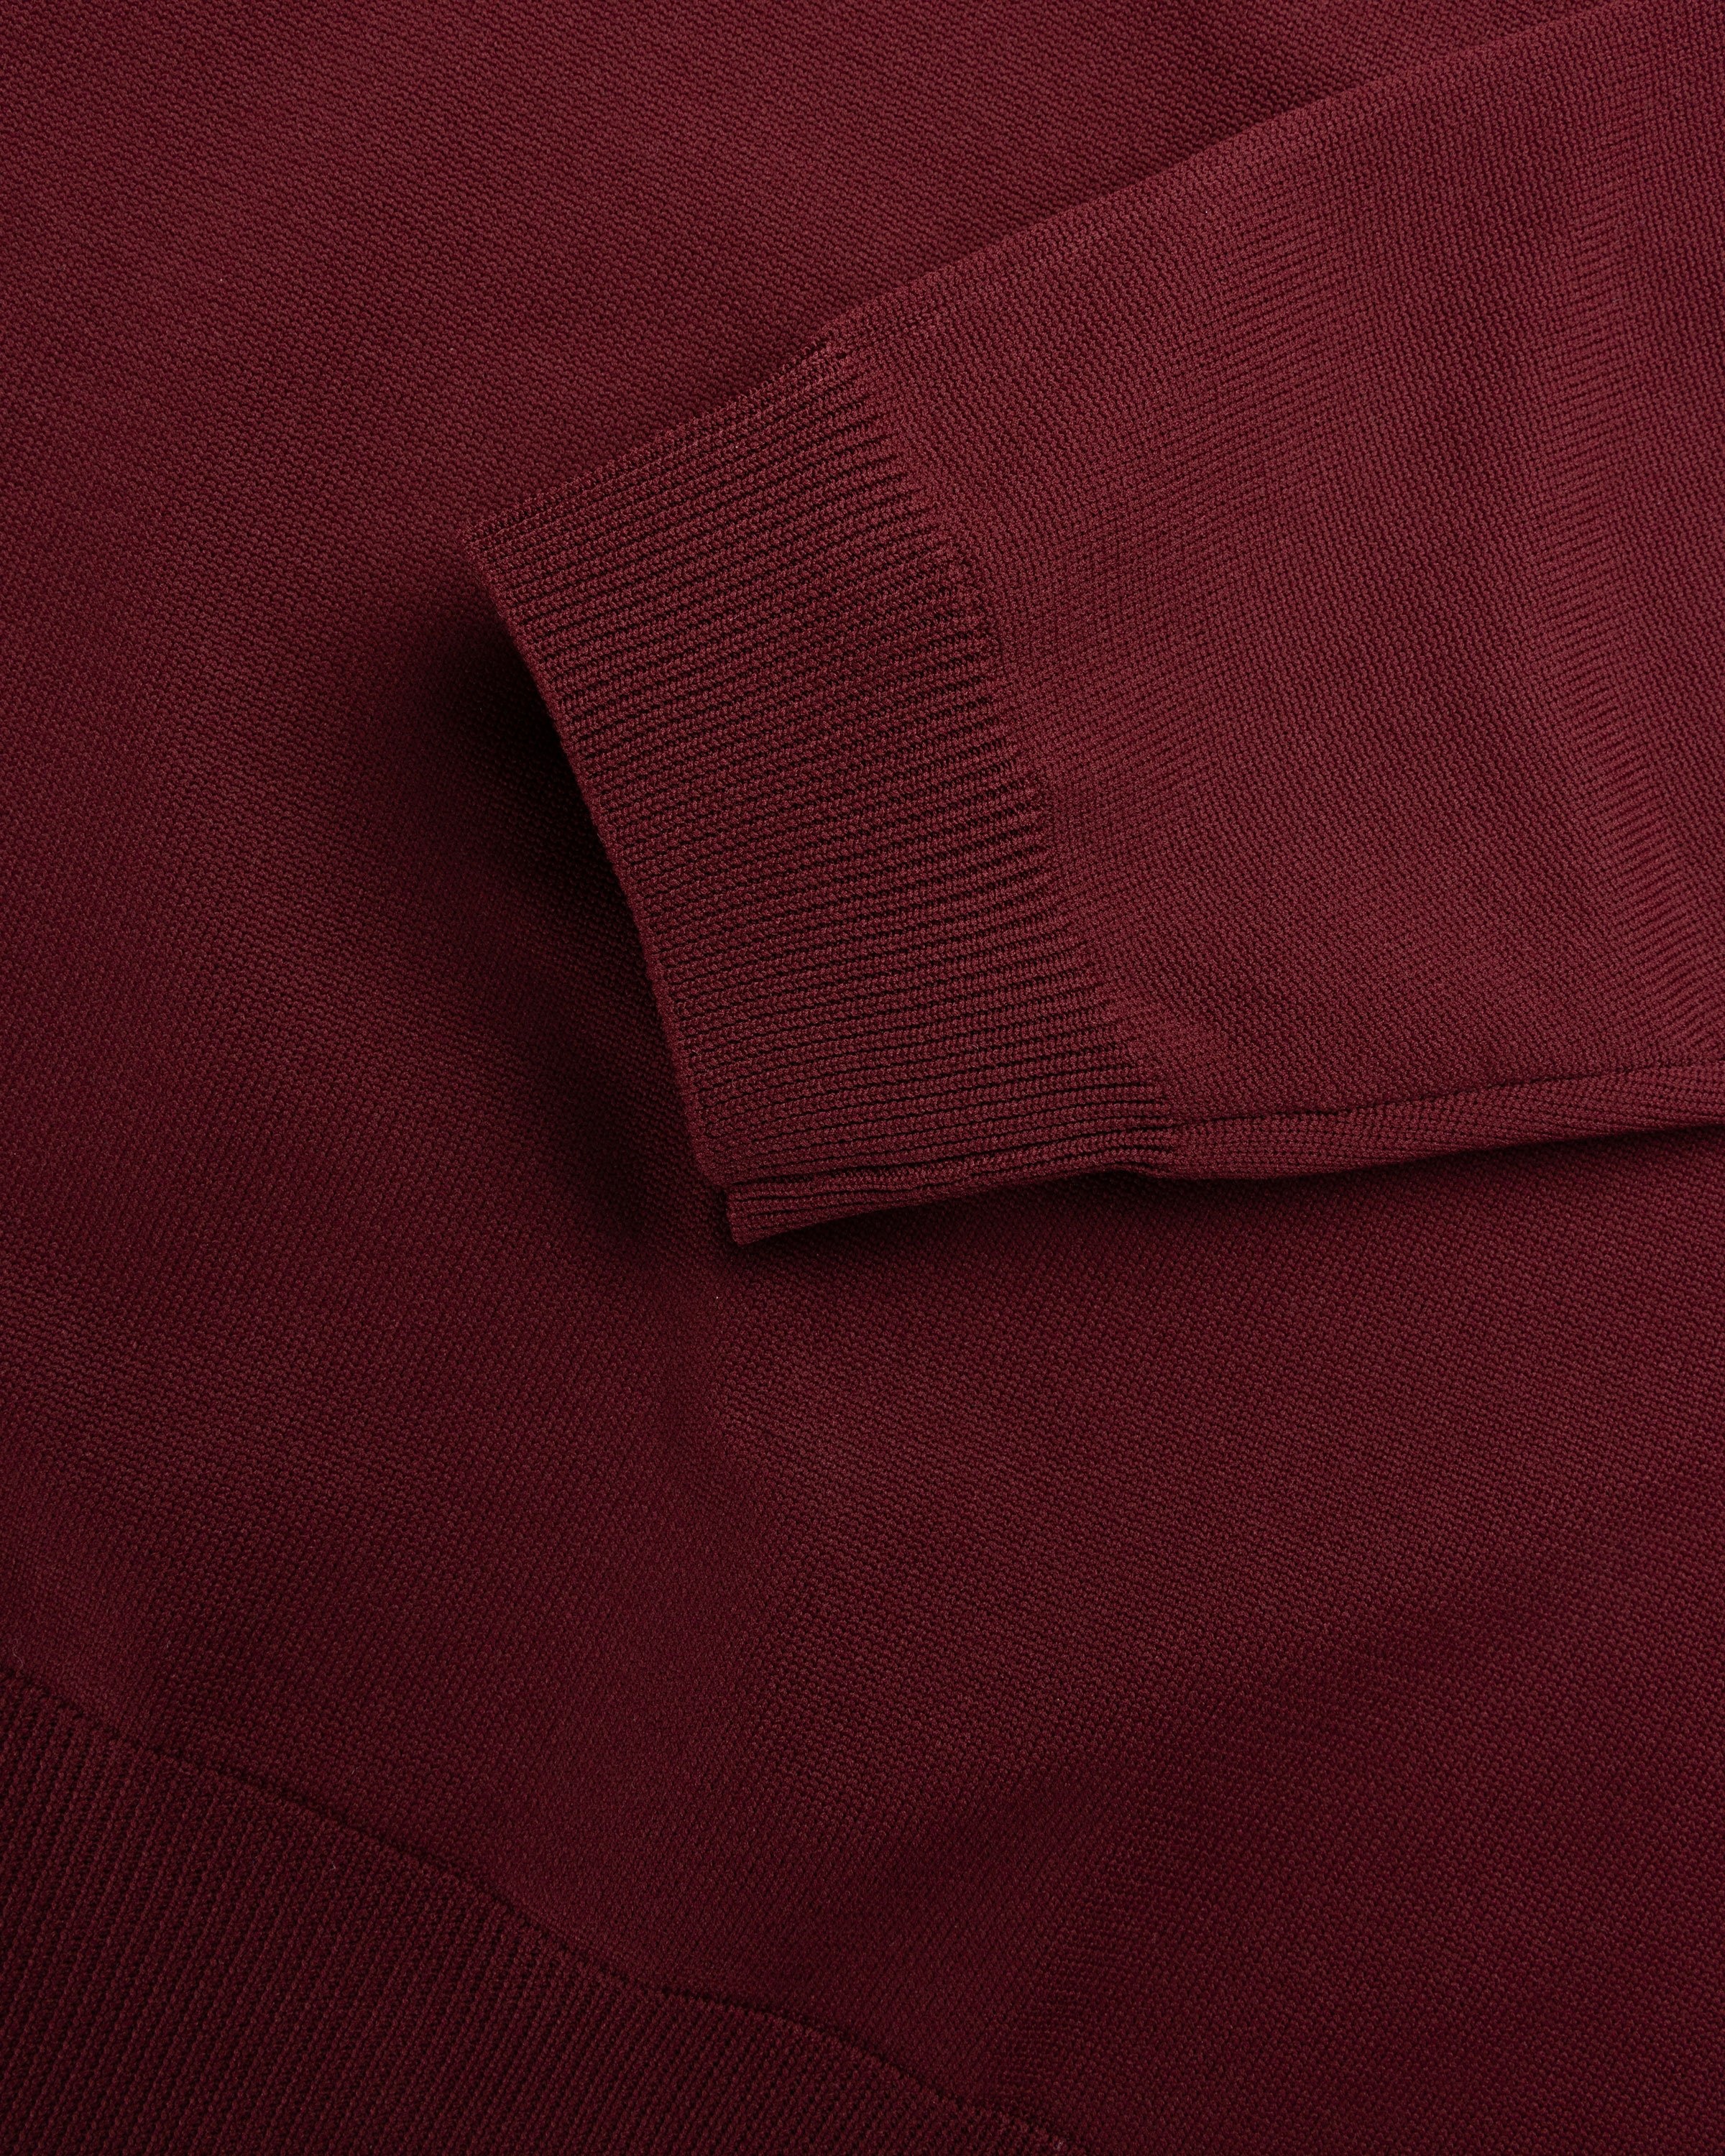 Highsnobiety HS05 – Long Sleeves Knit Polo Bordeaux - Longsleeves - Red - Image 7